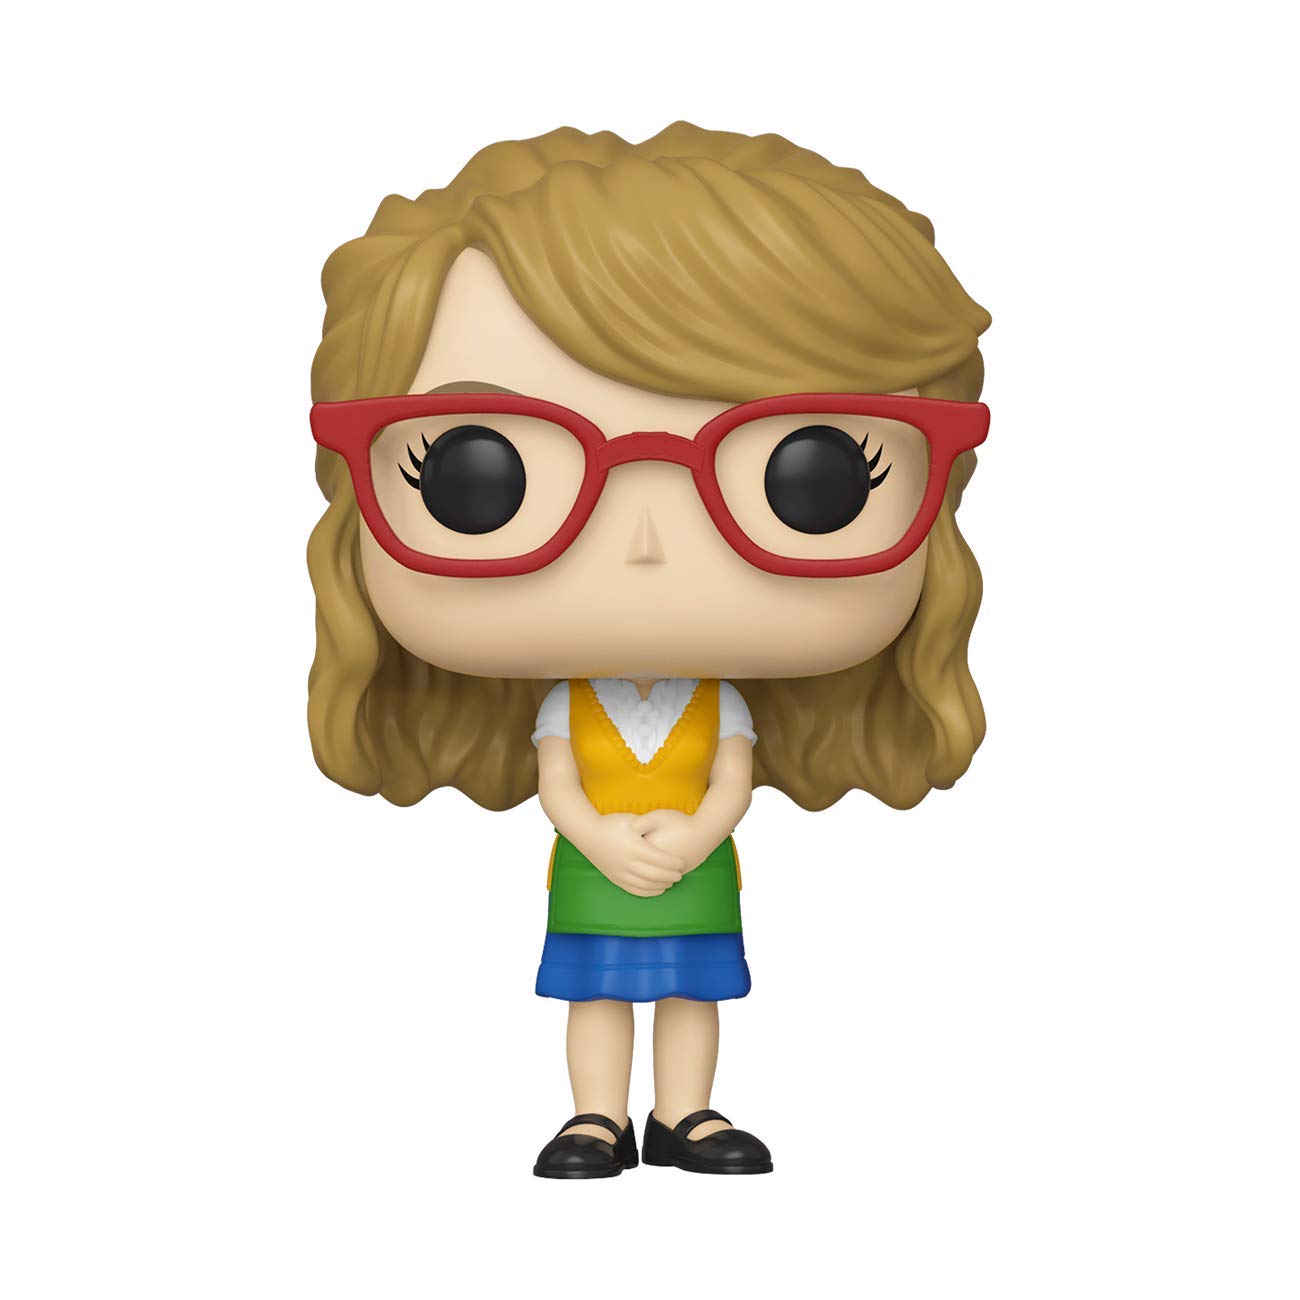 Pop! Television - The Big Bang Theory - Bernadette Rostenkowski - #783